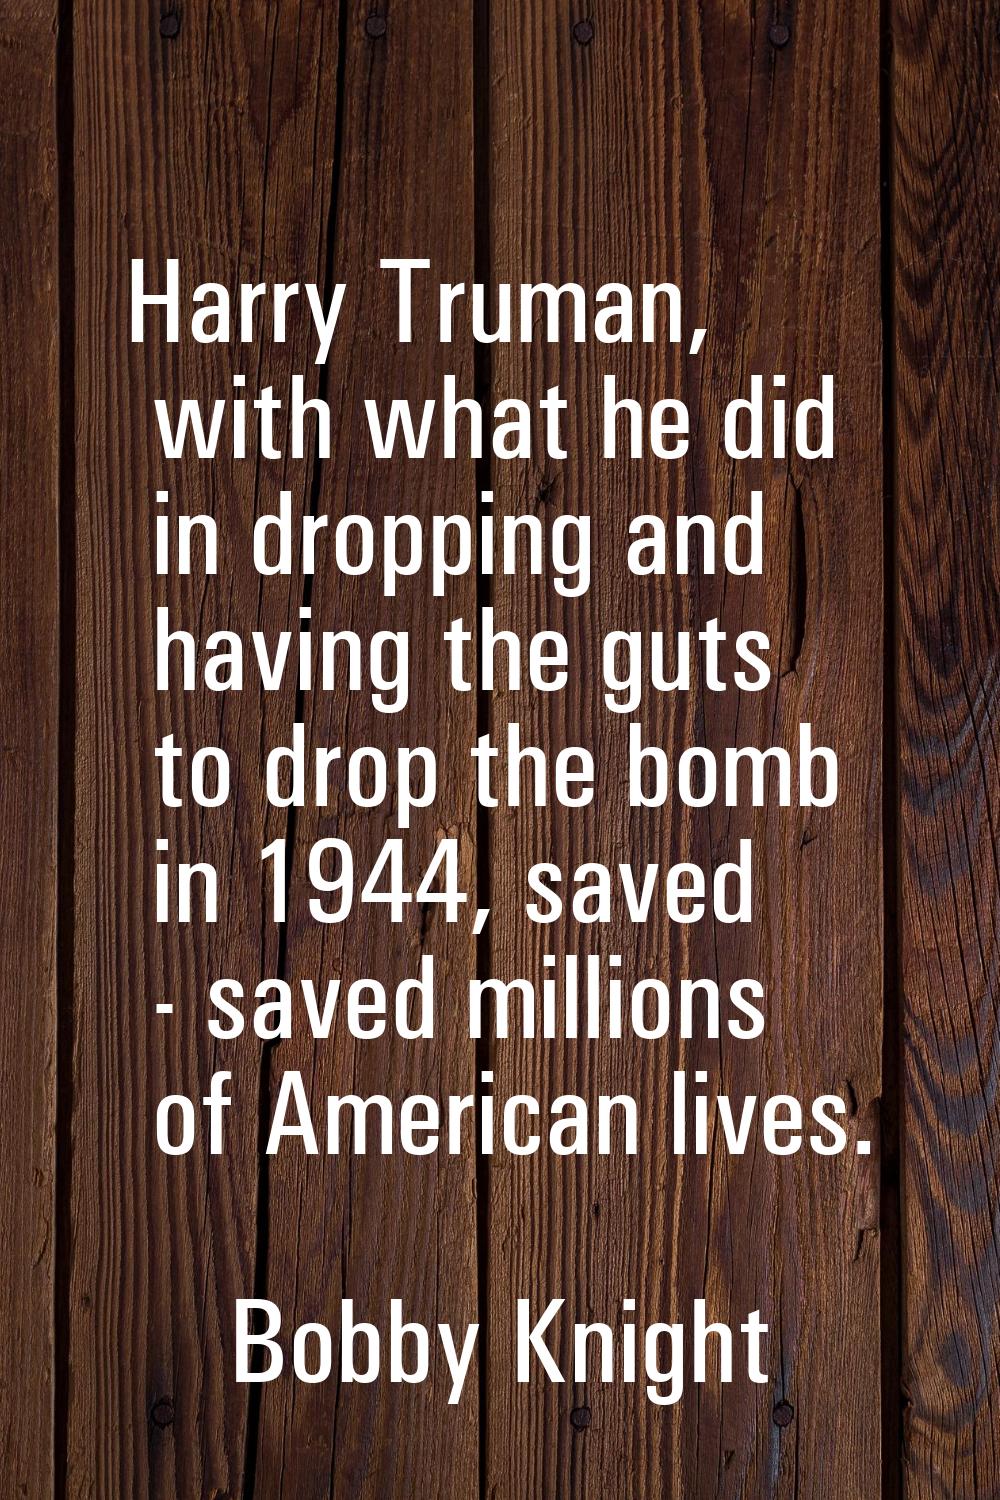 Harry Truman, with what he did in dropping and having the guts to drop the bomb in 1944, saved - sa